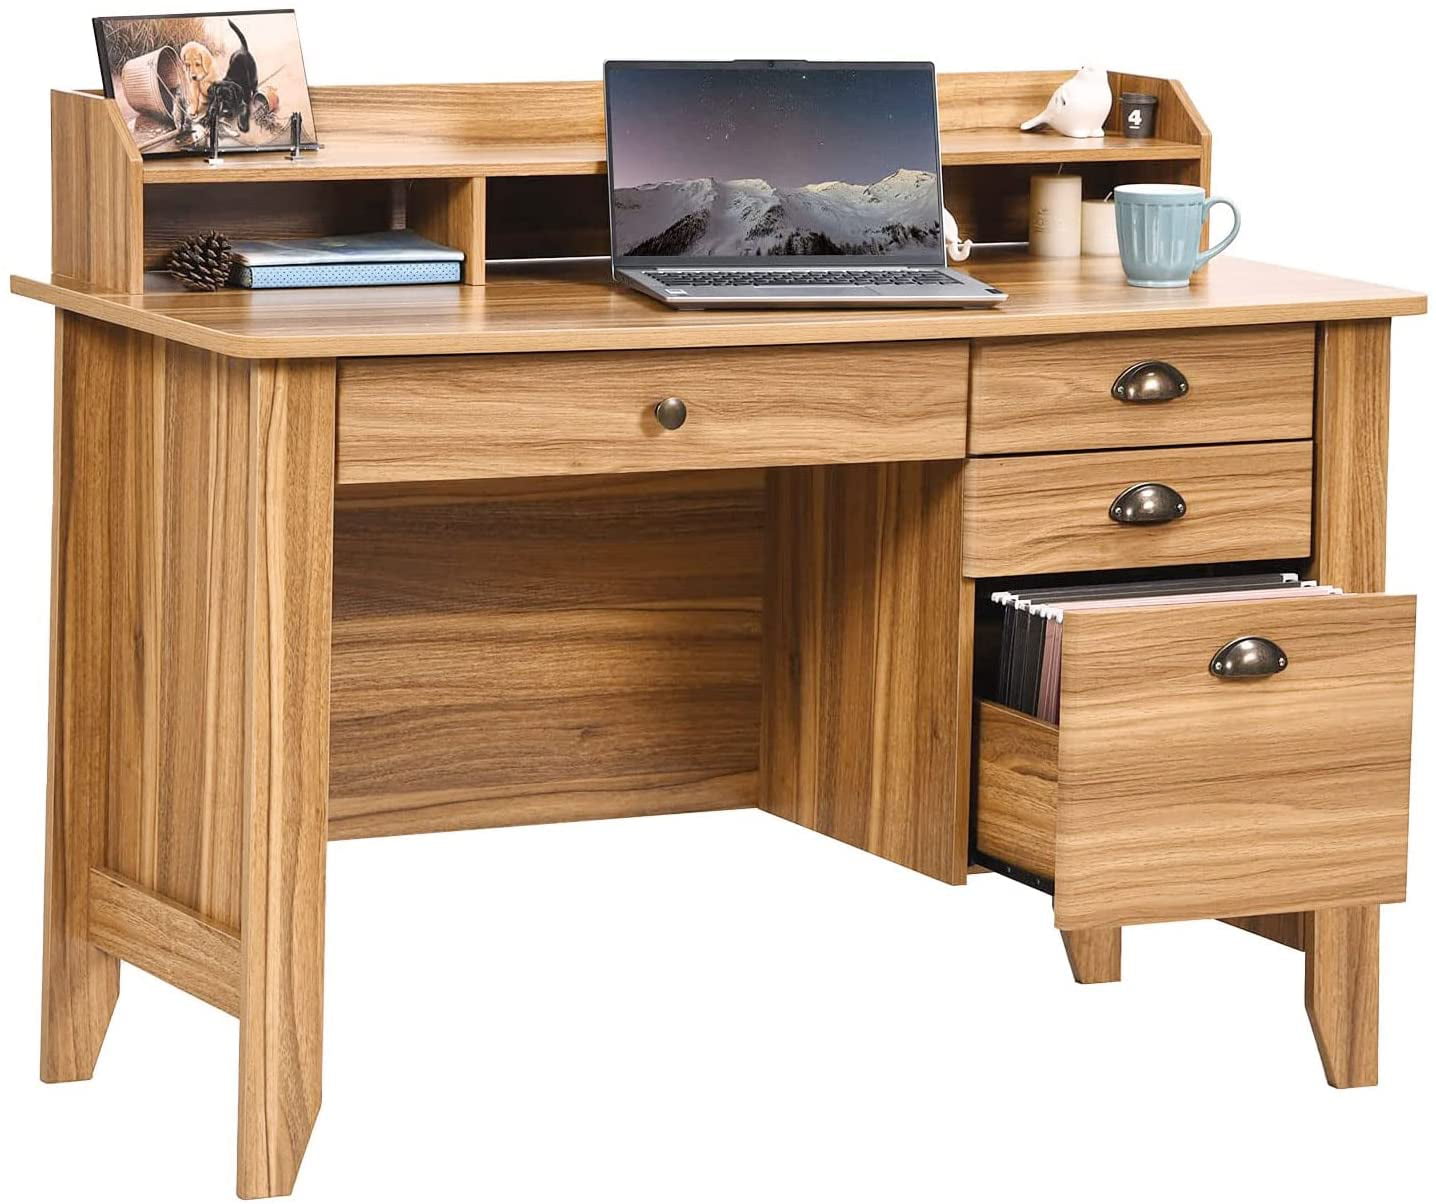 Catrimown 47.5 in Computer Desk with 4 Drawers, Wood Executive Desk Home Office Desk with Hutch, Vintage Study Table Writing Desk with Shelf for Small Spaces, Rustic Brown - 2